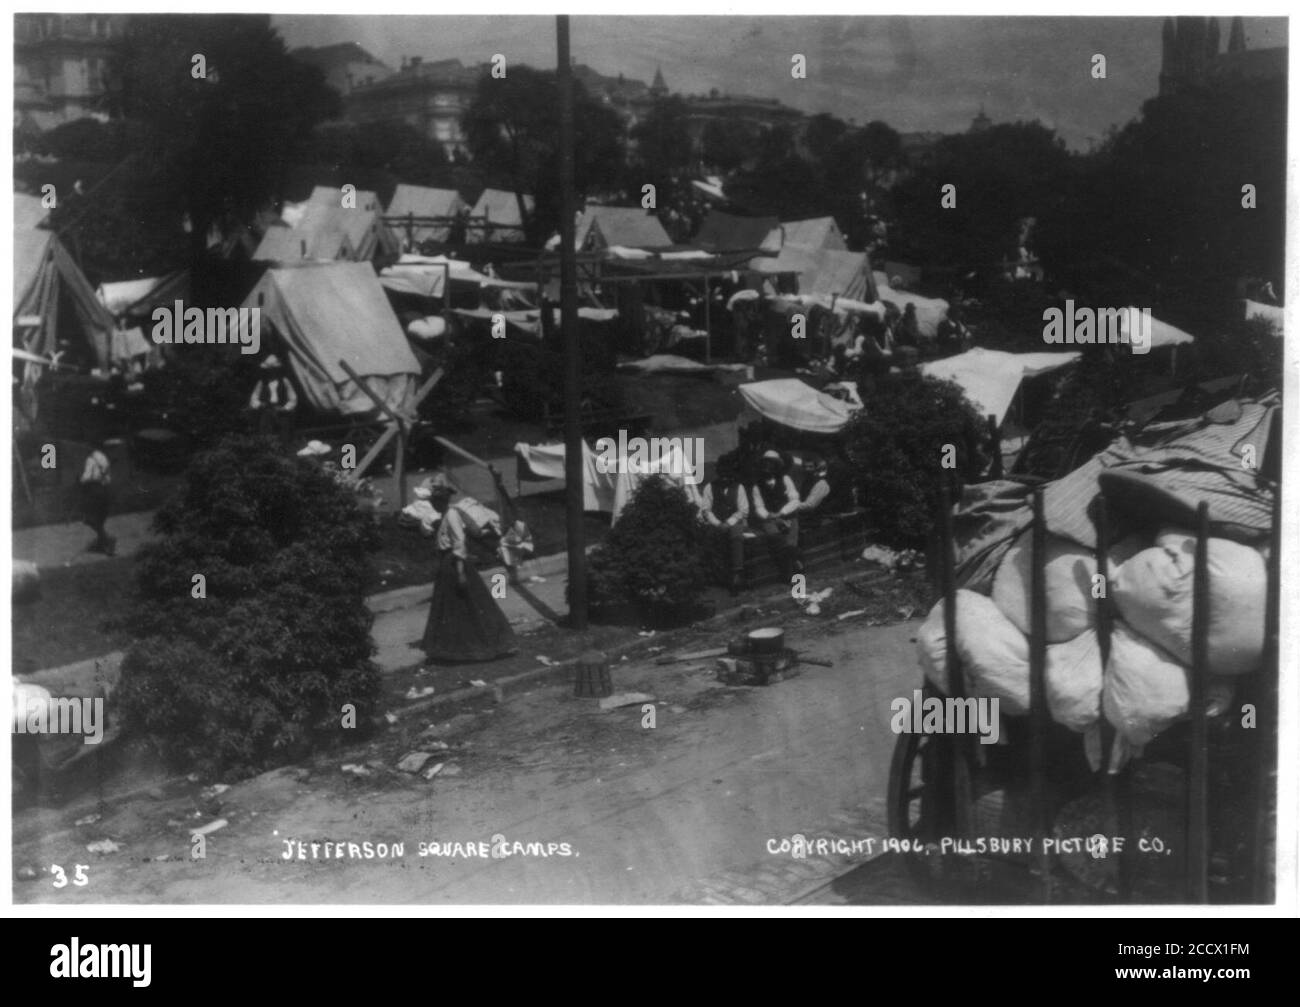 Jefferson Square camps, after the San Francisco earthquake and fire Stock Photo